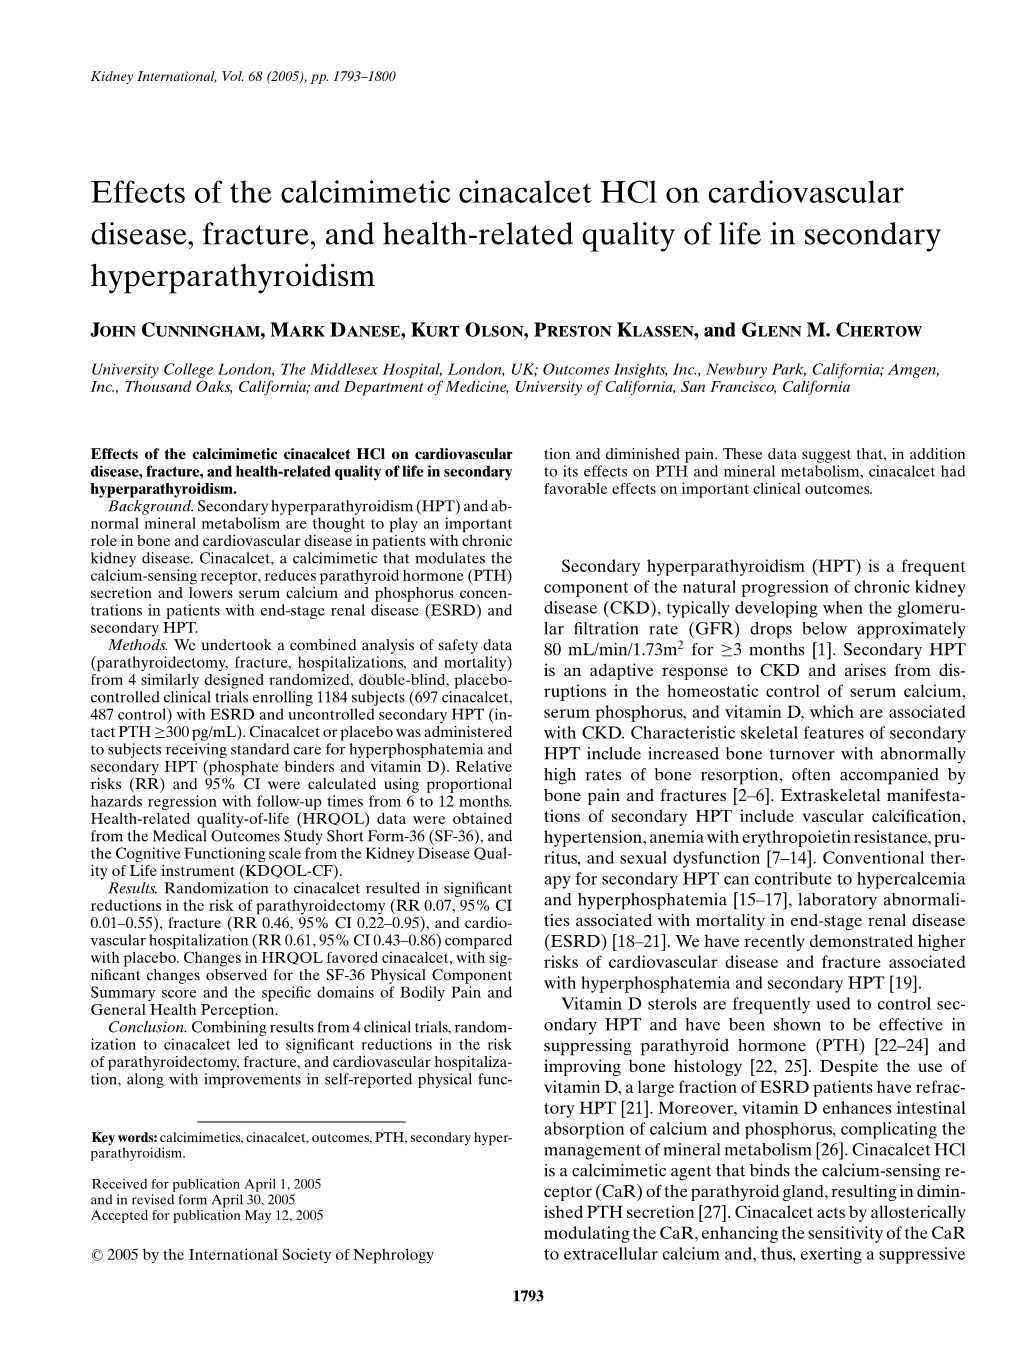 Effects of the Calcimimetic Cinacalcet Hcl on Cardiovascular Disease, Fracture, and Health-Related Quality of Life in Secondary Hyperparathyroidism